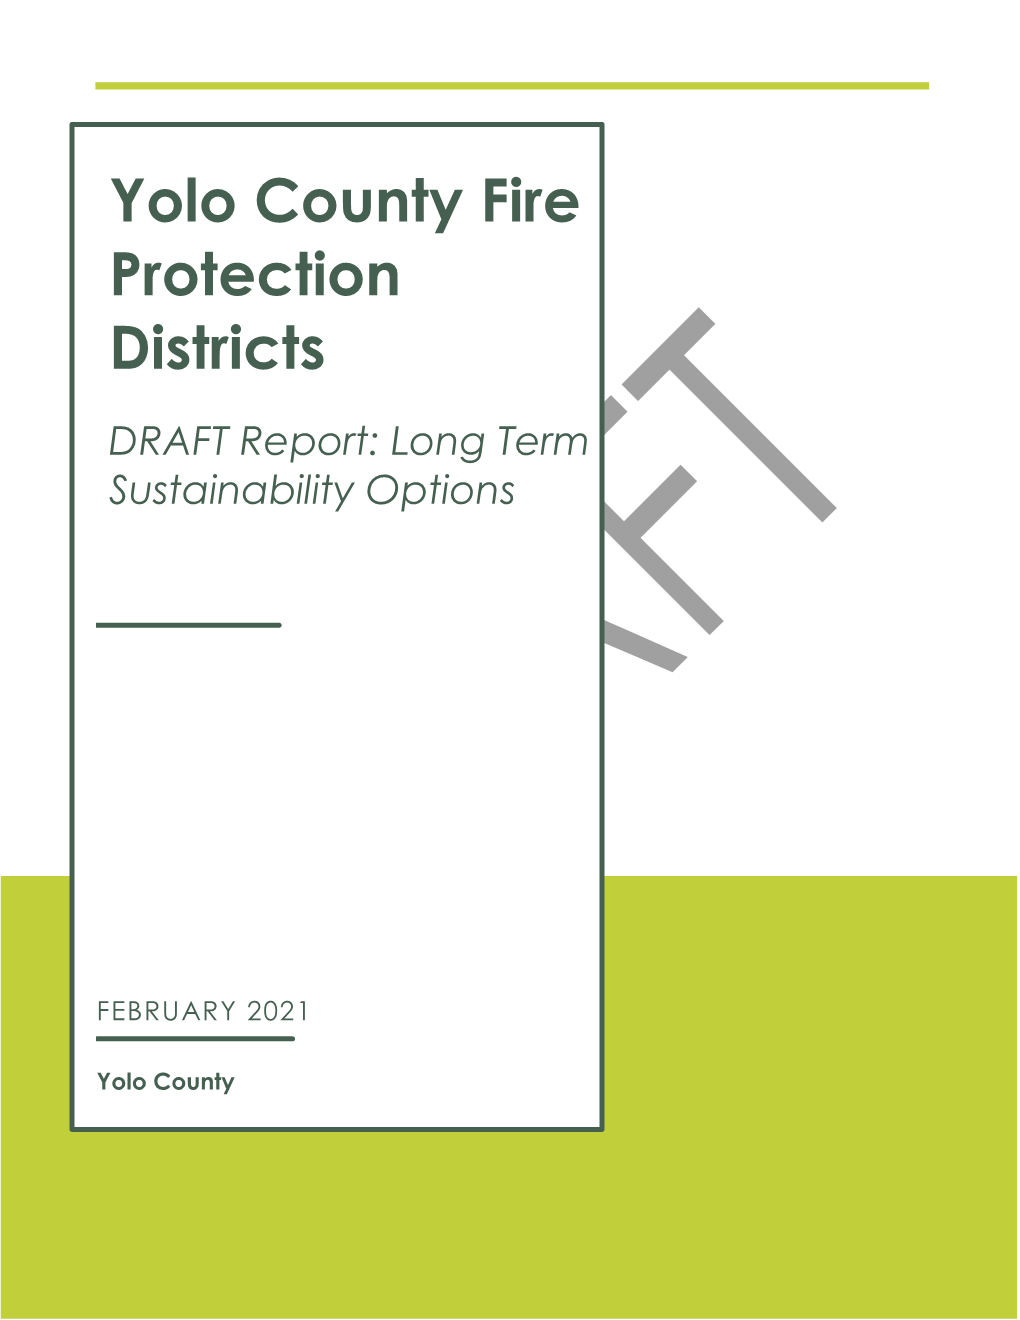 Yolo County Fire Protection Districts